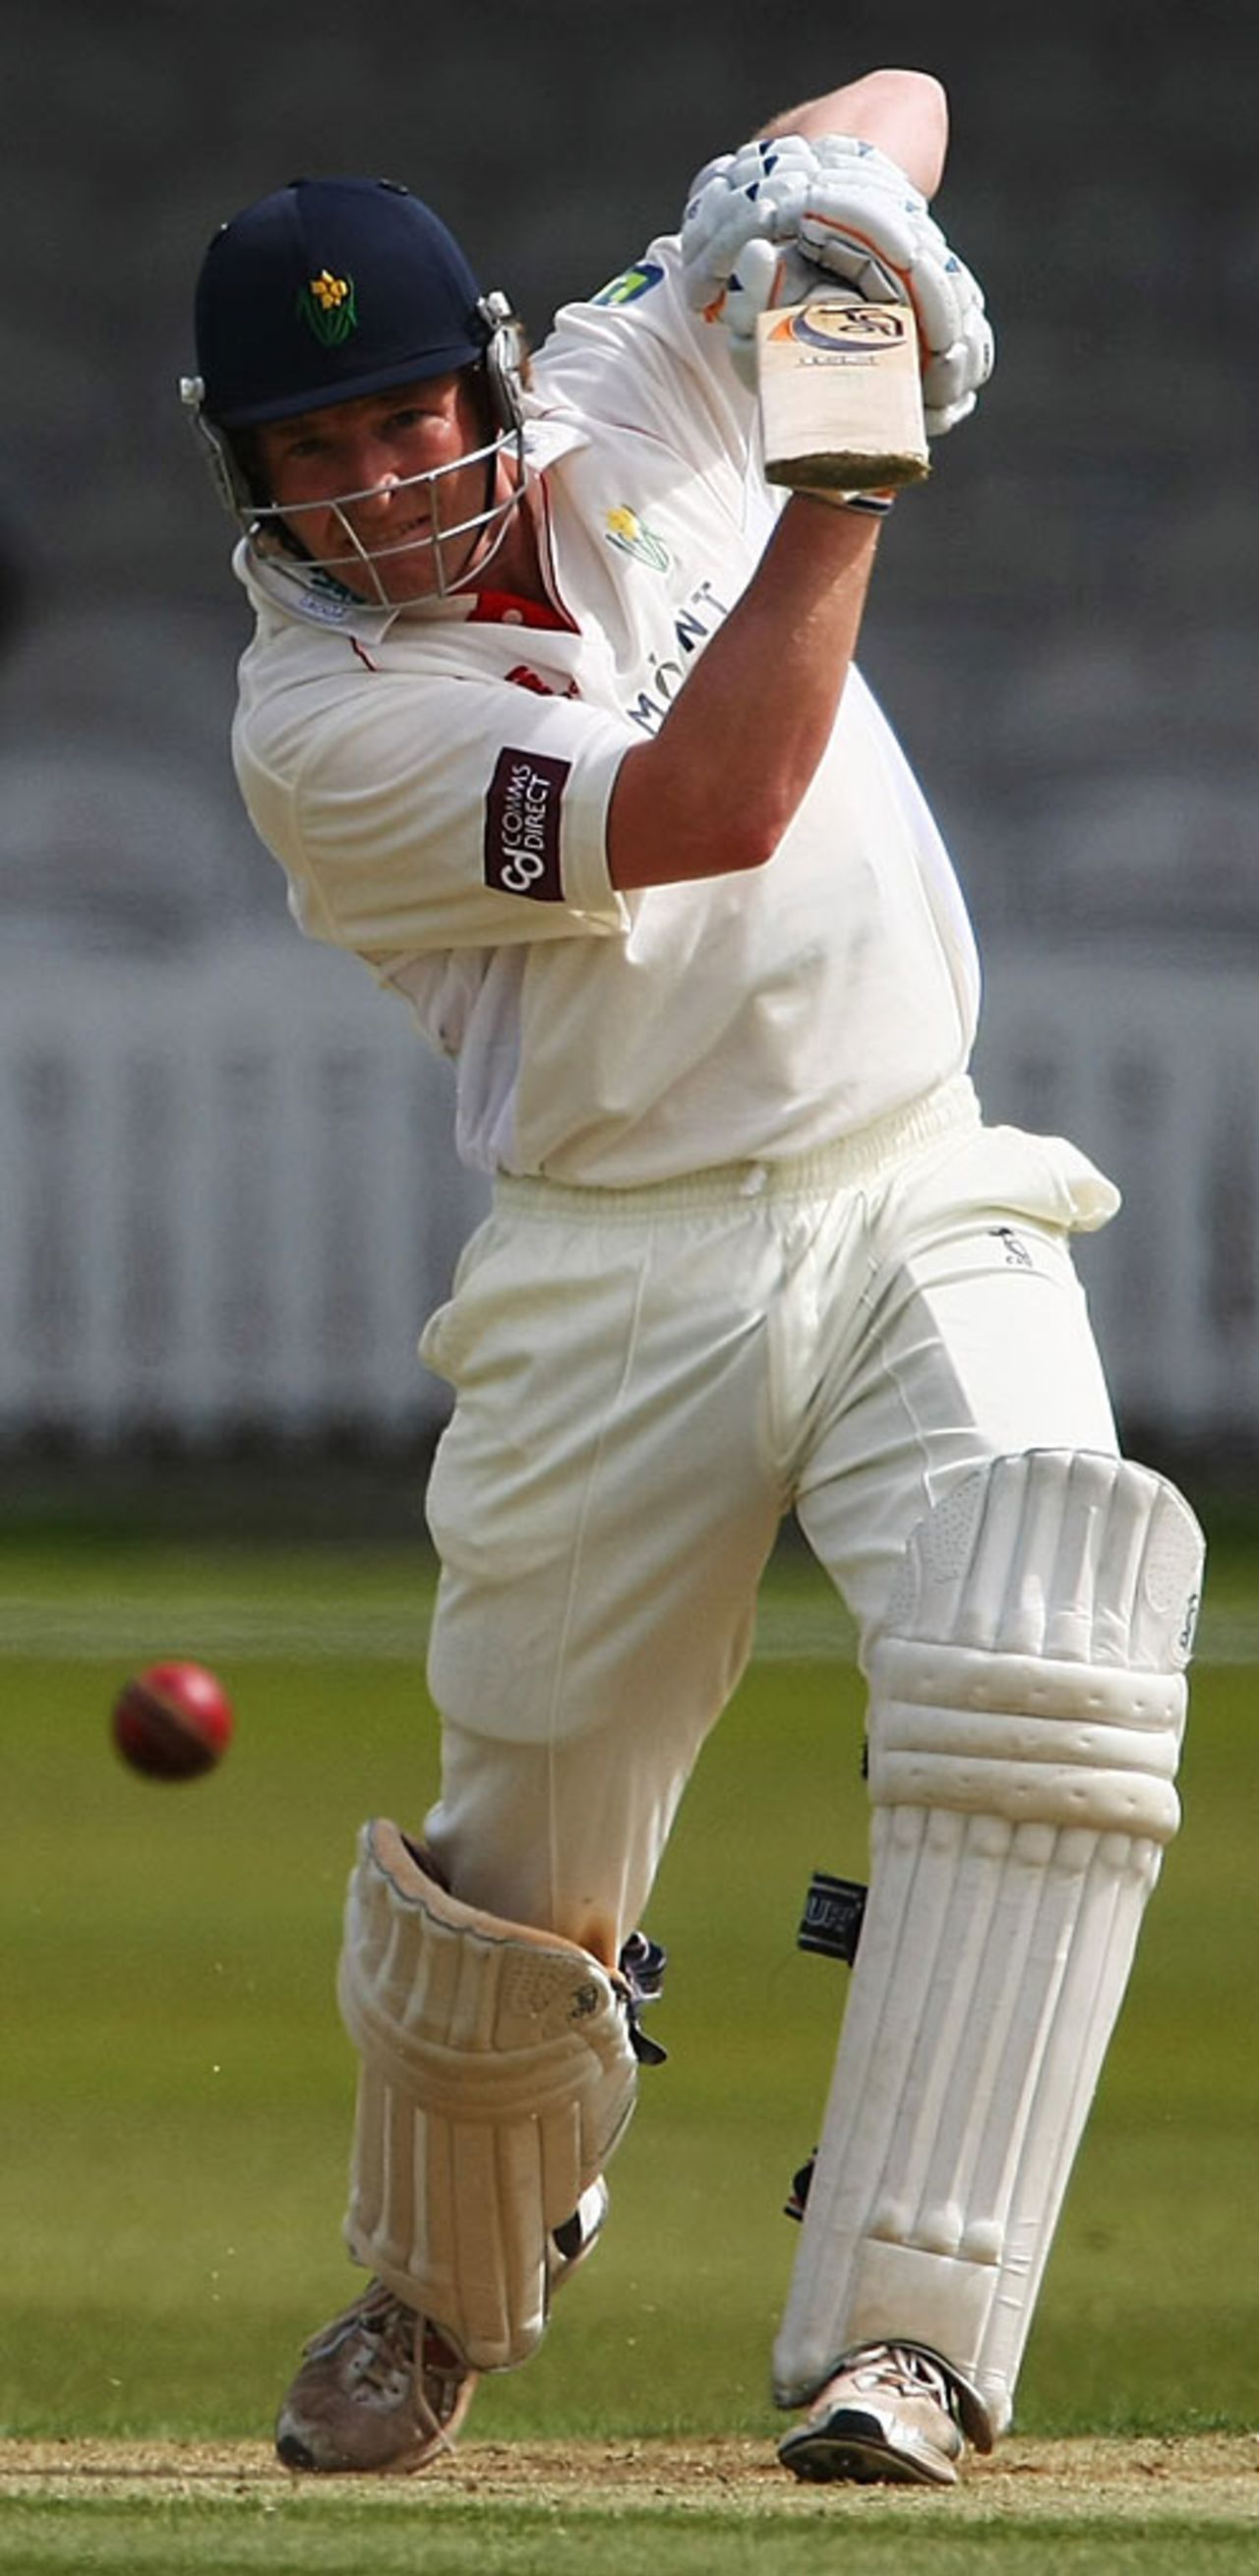 Jamie Dalrymple stands tall while punching off the back foot, Middlesex v Glamorgan, County Championship, Lord's, April 25, 2008